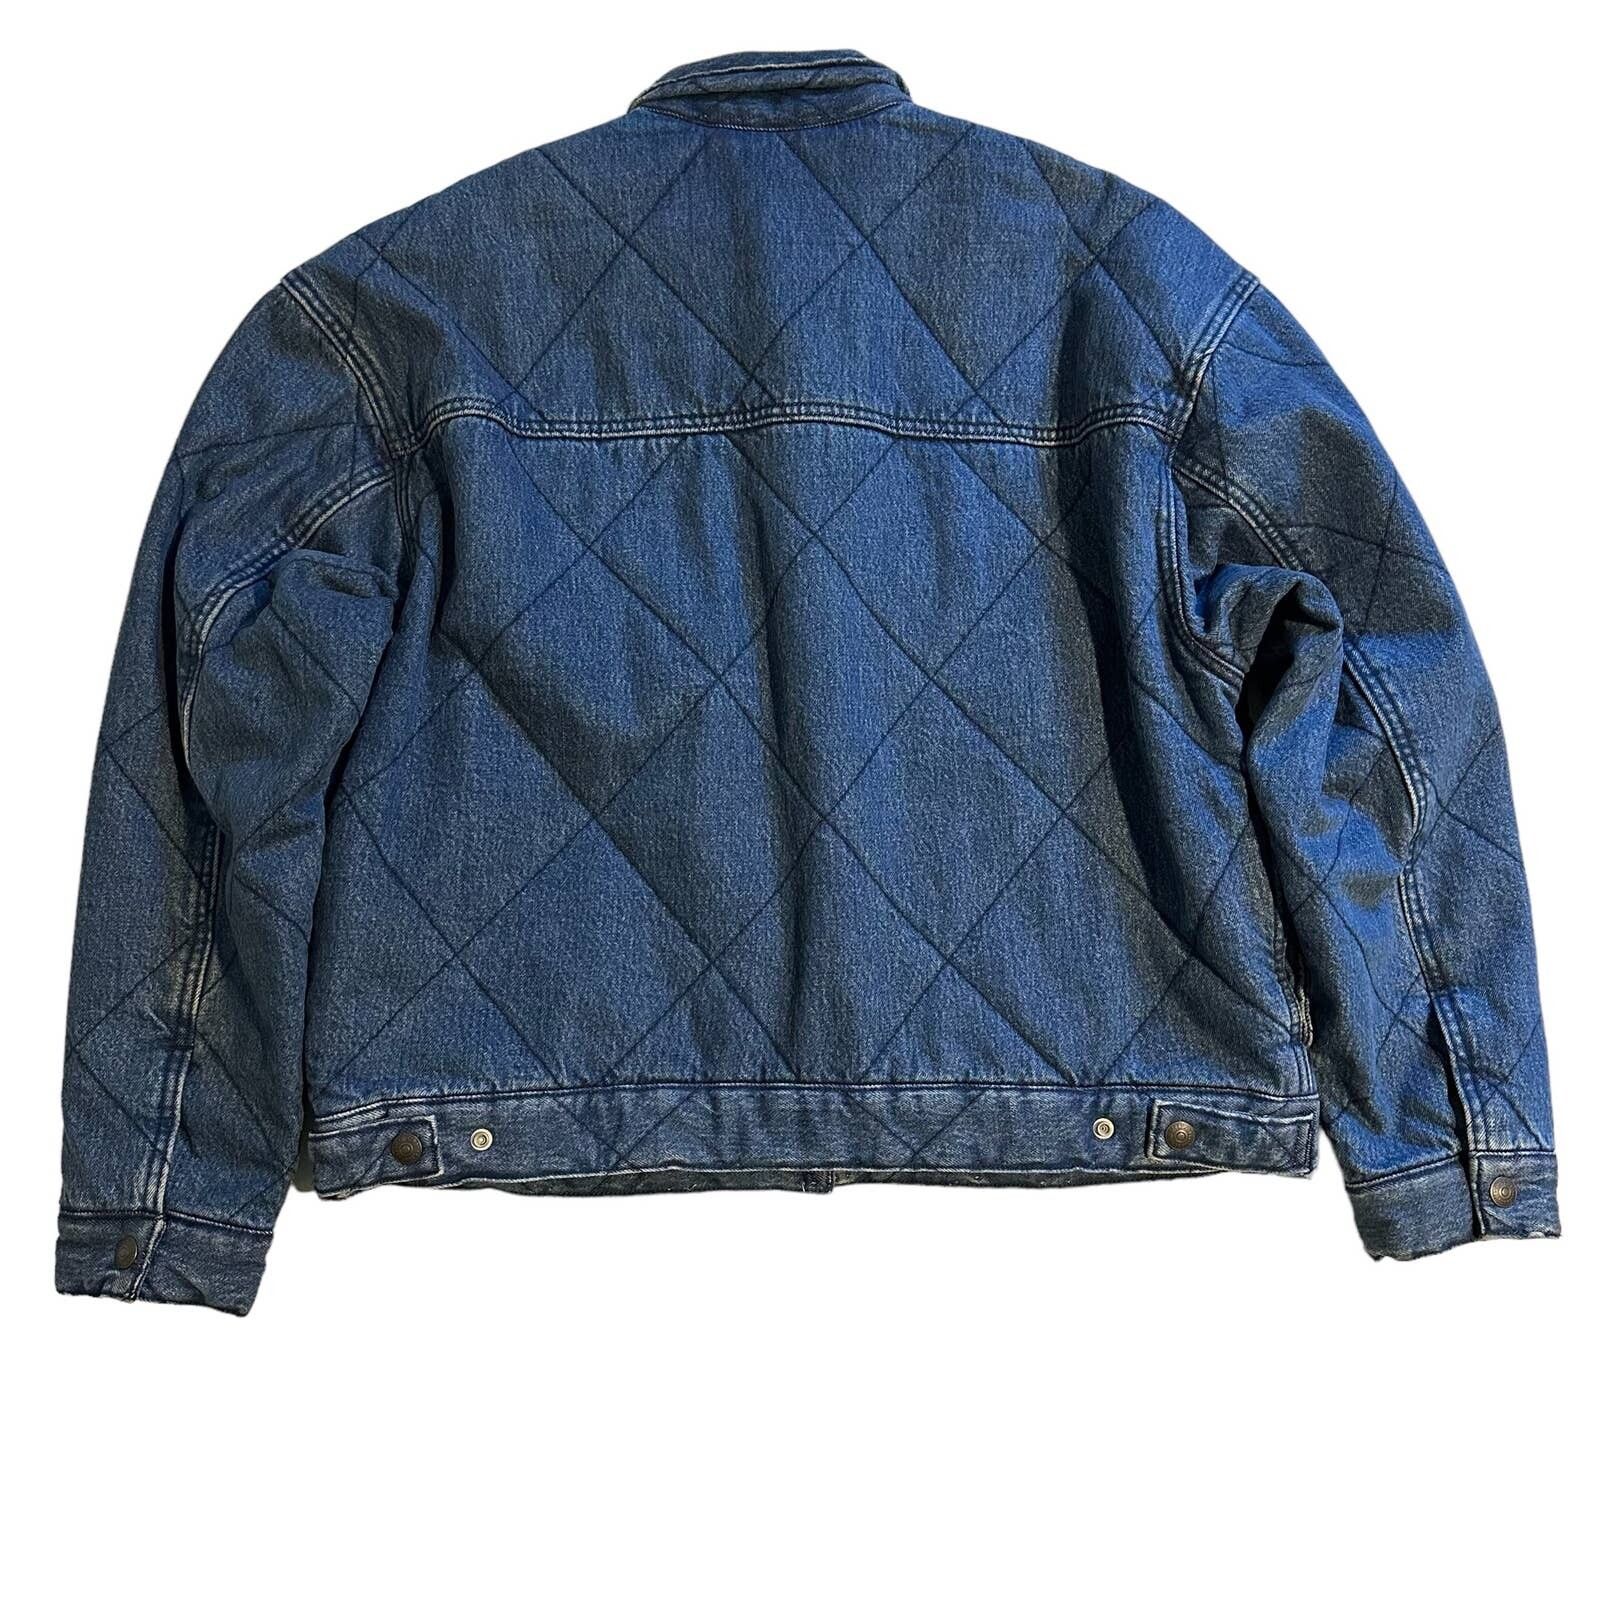 Levi's Levi’s Stay Loose Quilted Type ll Trucker Jacket Medium Size US M / EU 48-50 / 2 - 3 Thumbnail